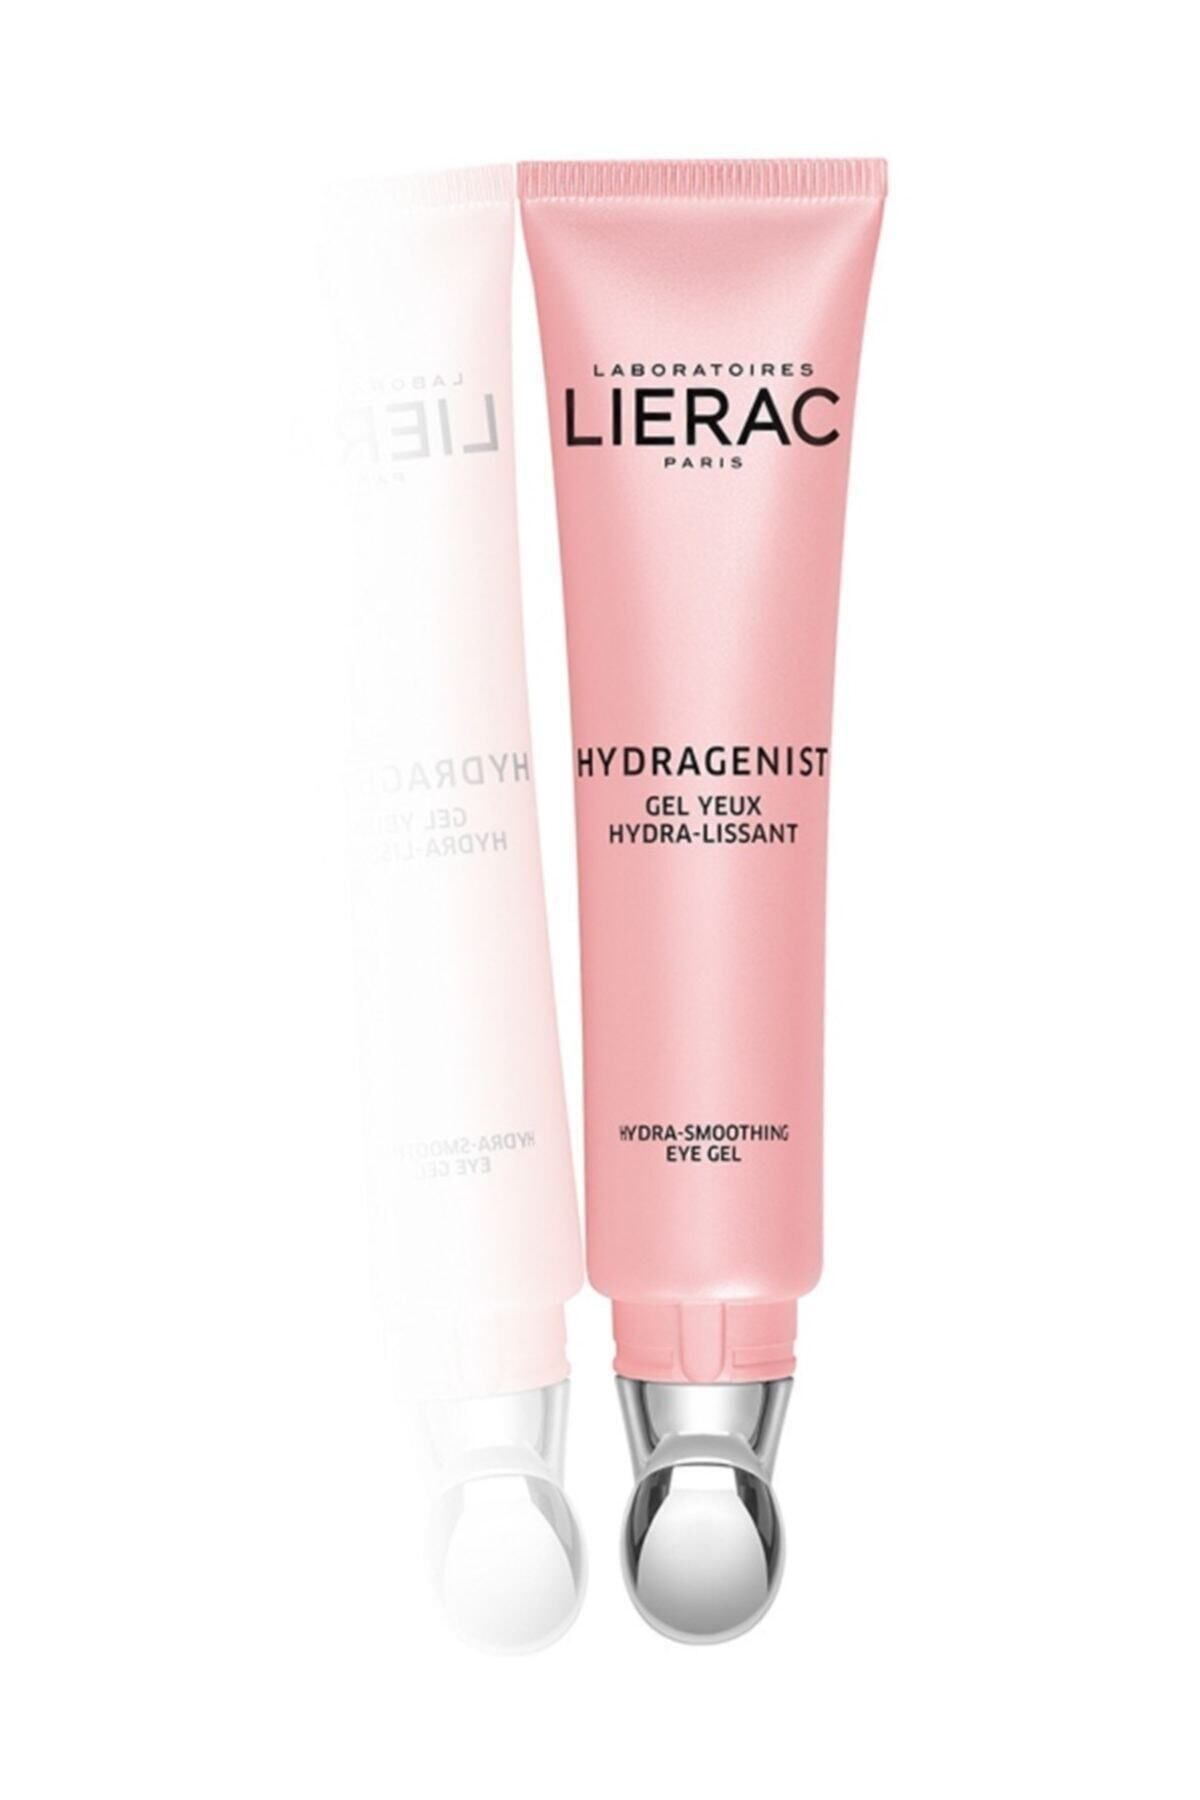 Lierac REDUCİNG THE APPEARANCE OF WRİNKLES ANTI DARK CIRCLE EYE CONTOUR CARE CREAM 15ML DMBA587